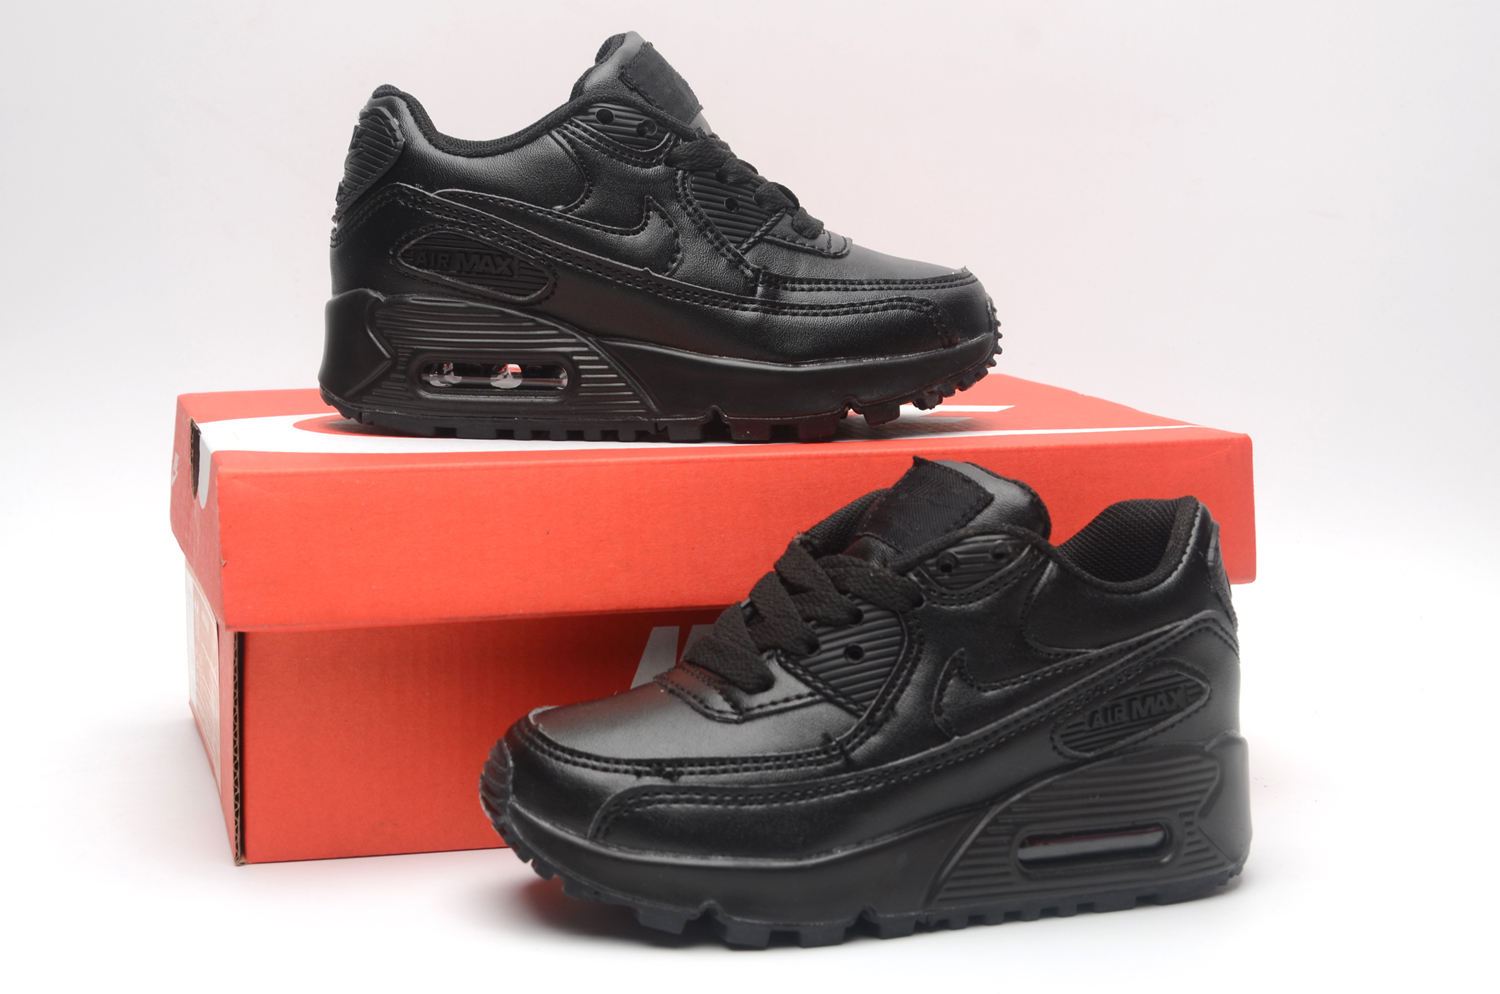 Women's Running weapon Air Max 90 Shoes 030